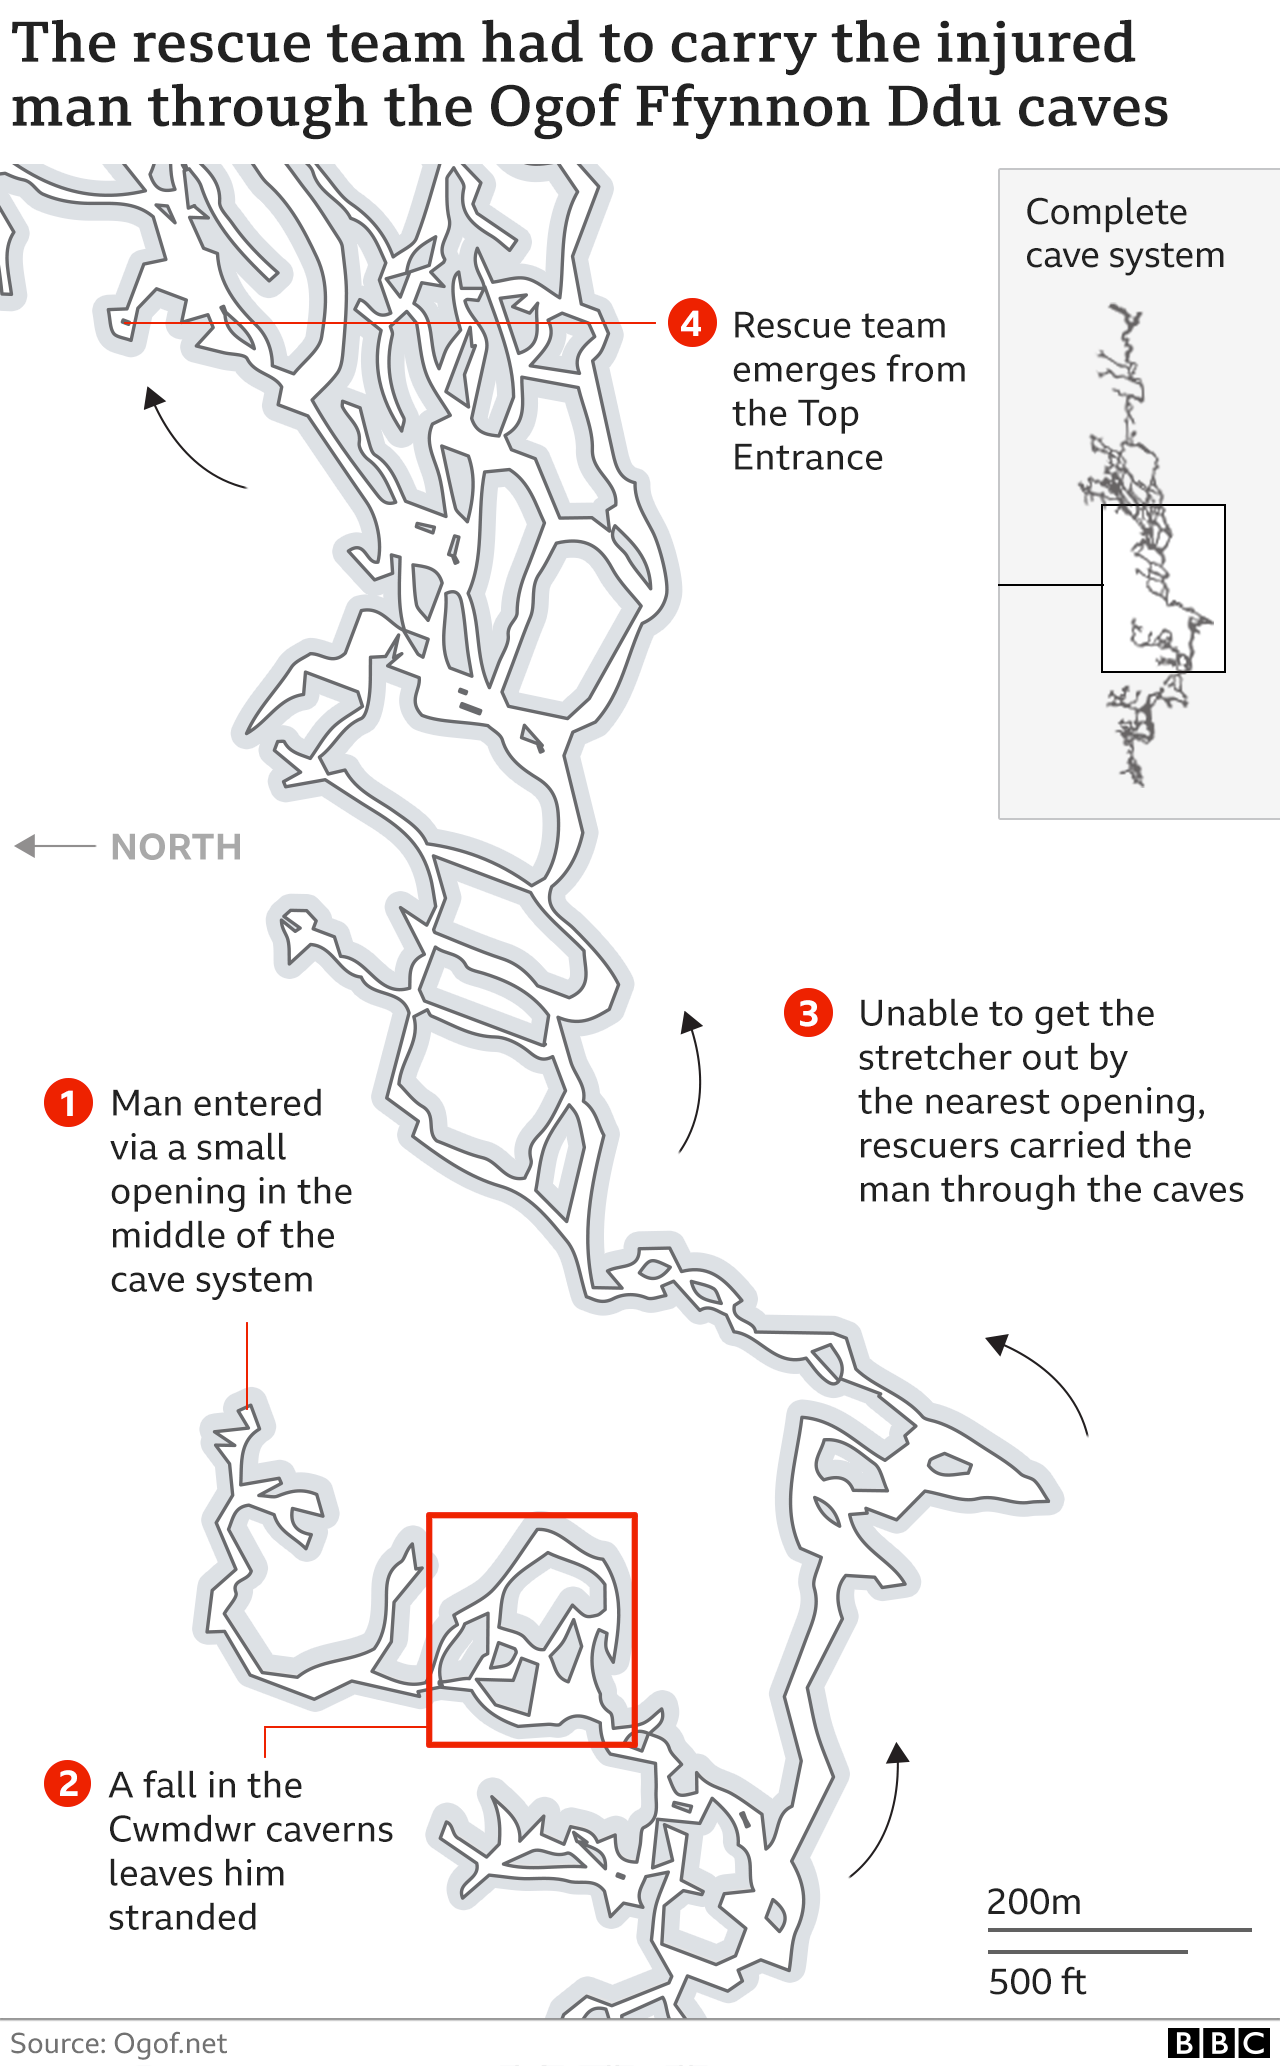 A map showing the Ogof Ffynnon Ddu cave system which rescuers navigated